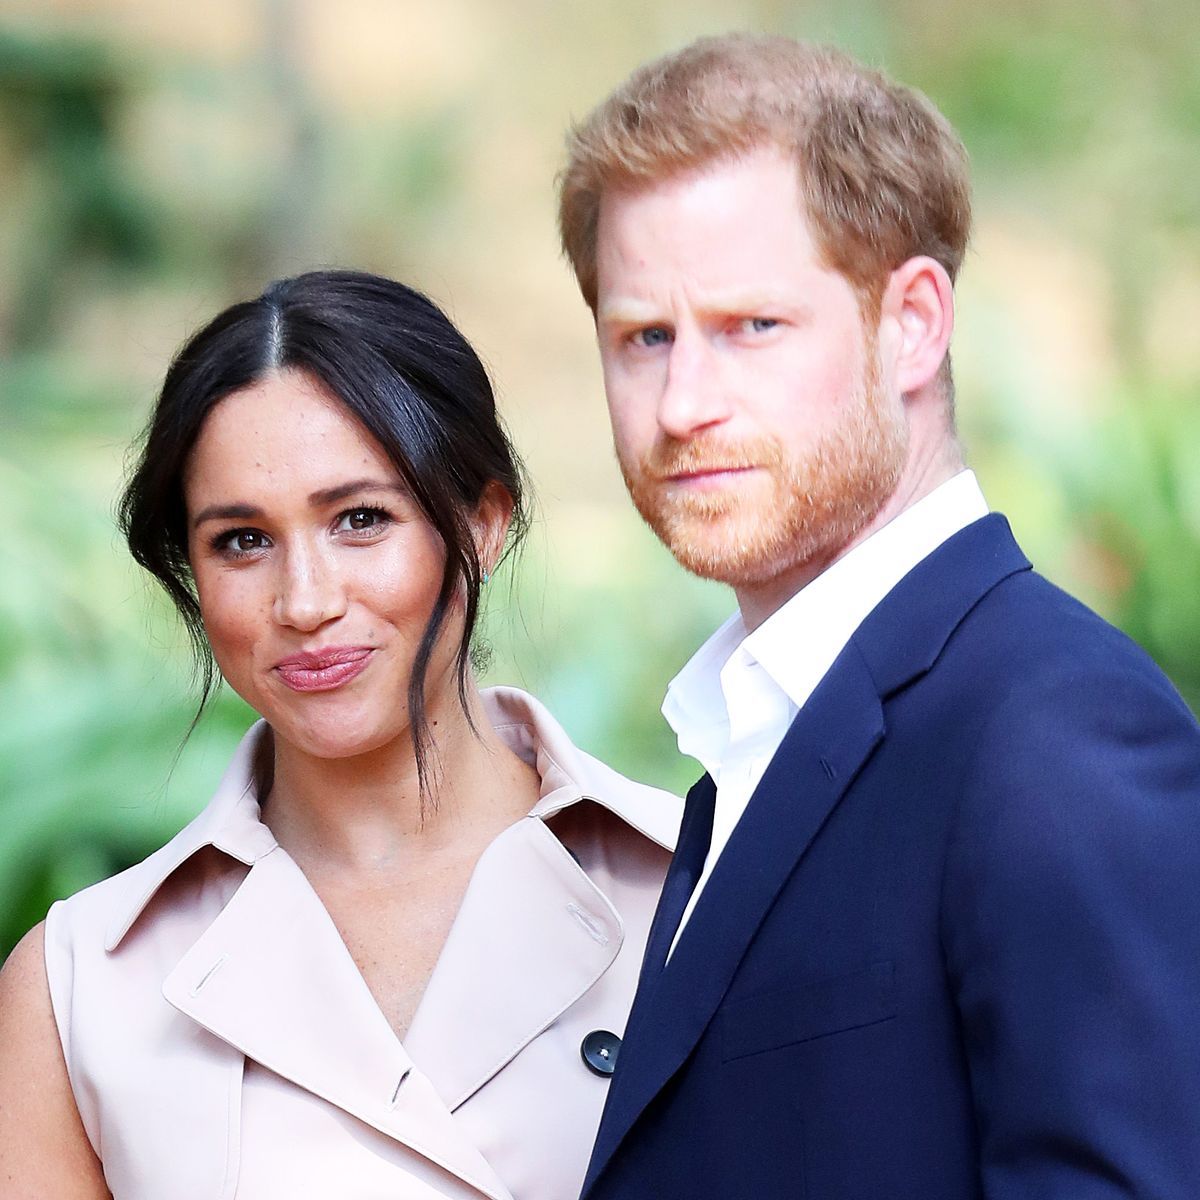 Prince Harry and former actress Meghan Markle has waved goodbye to crowns and hello to a new life in Los Angeles. Will they ever return?